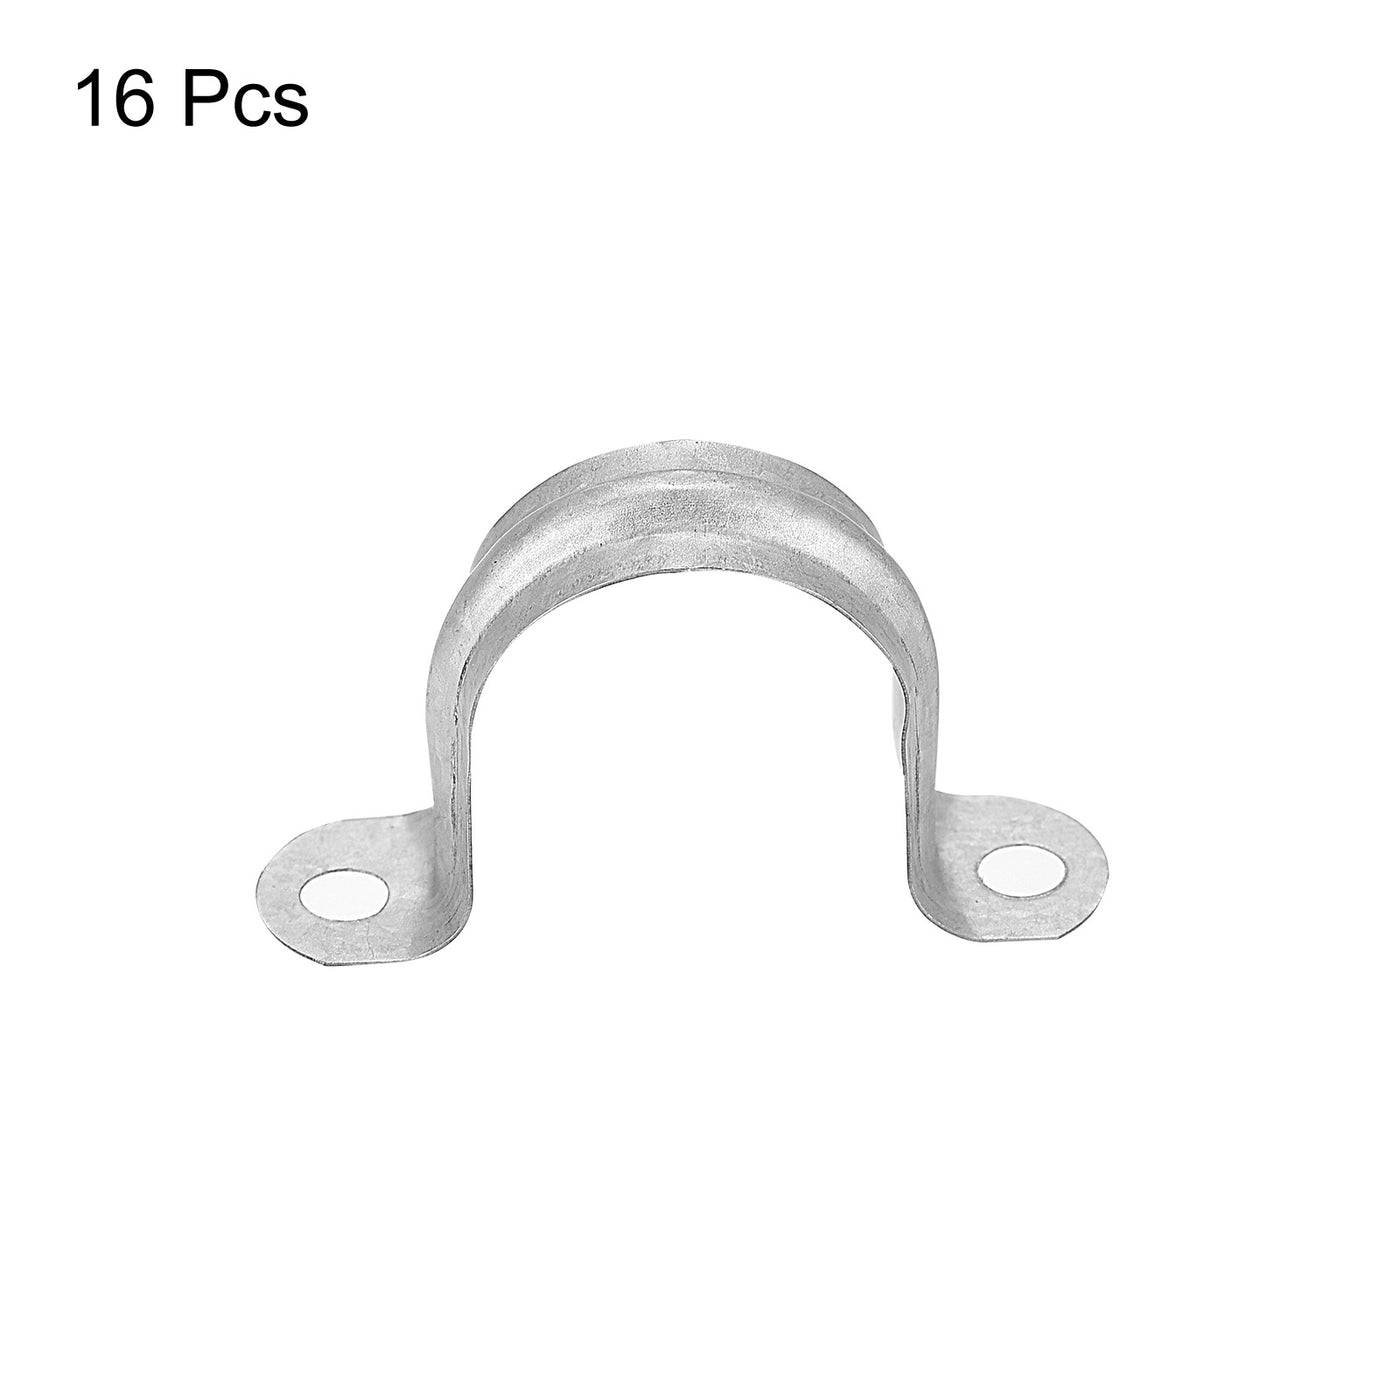 uxcell Uxcell Rigid Pipe Strap 16pcs 1" (25mm) Carbon Steel U Bracket Tension Tube Clamp